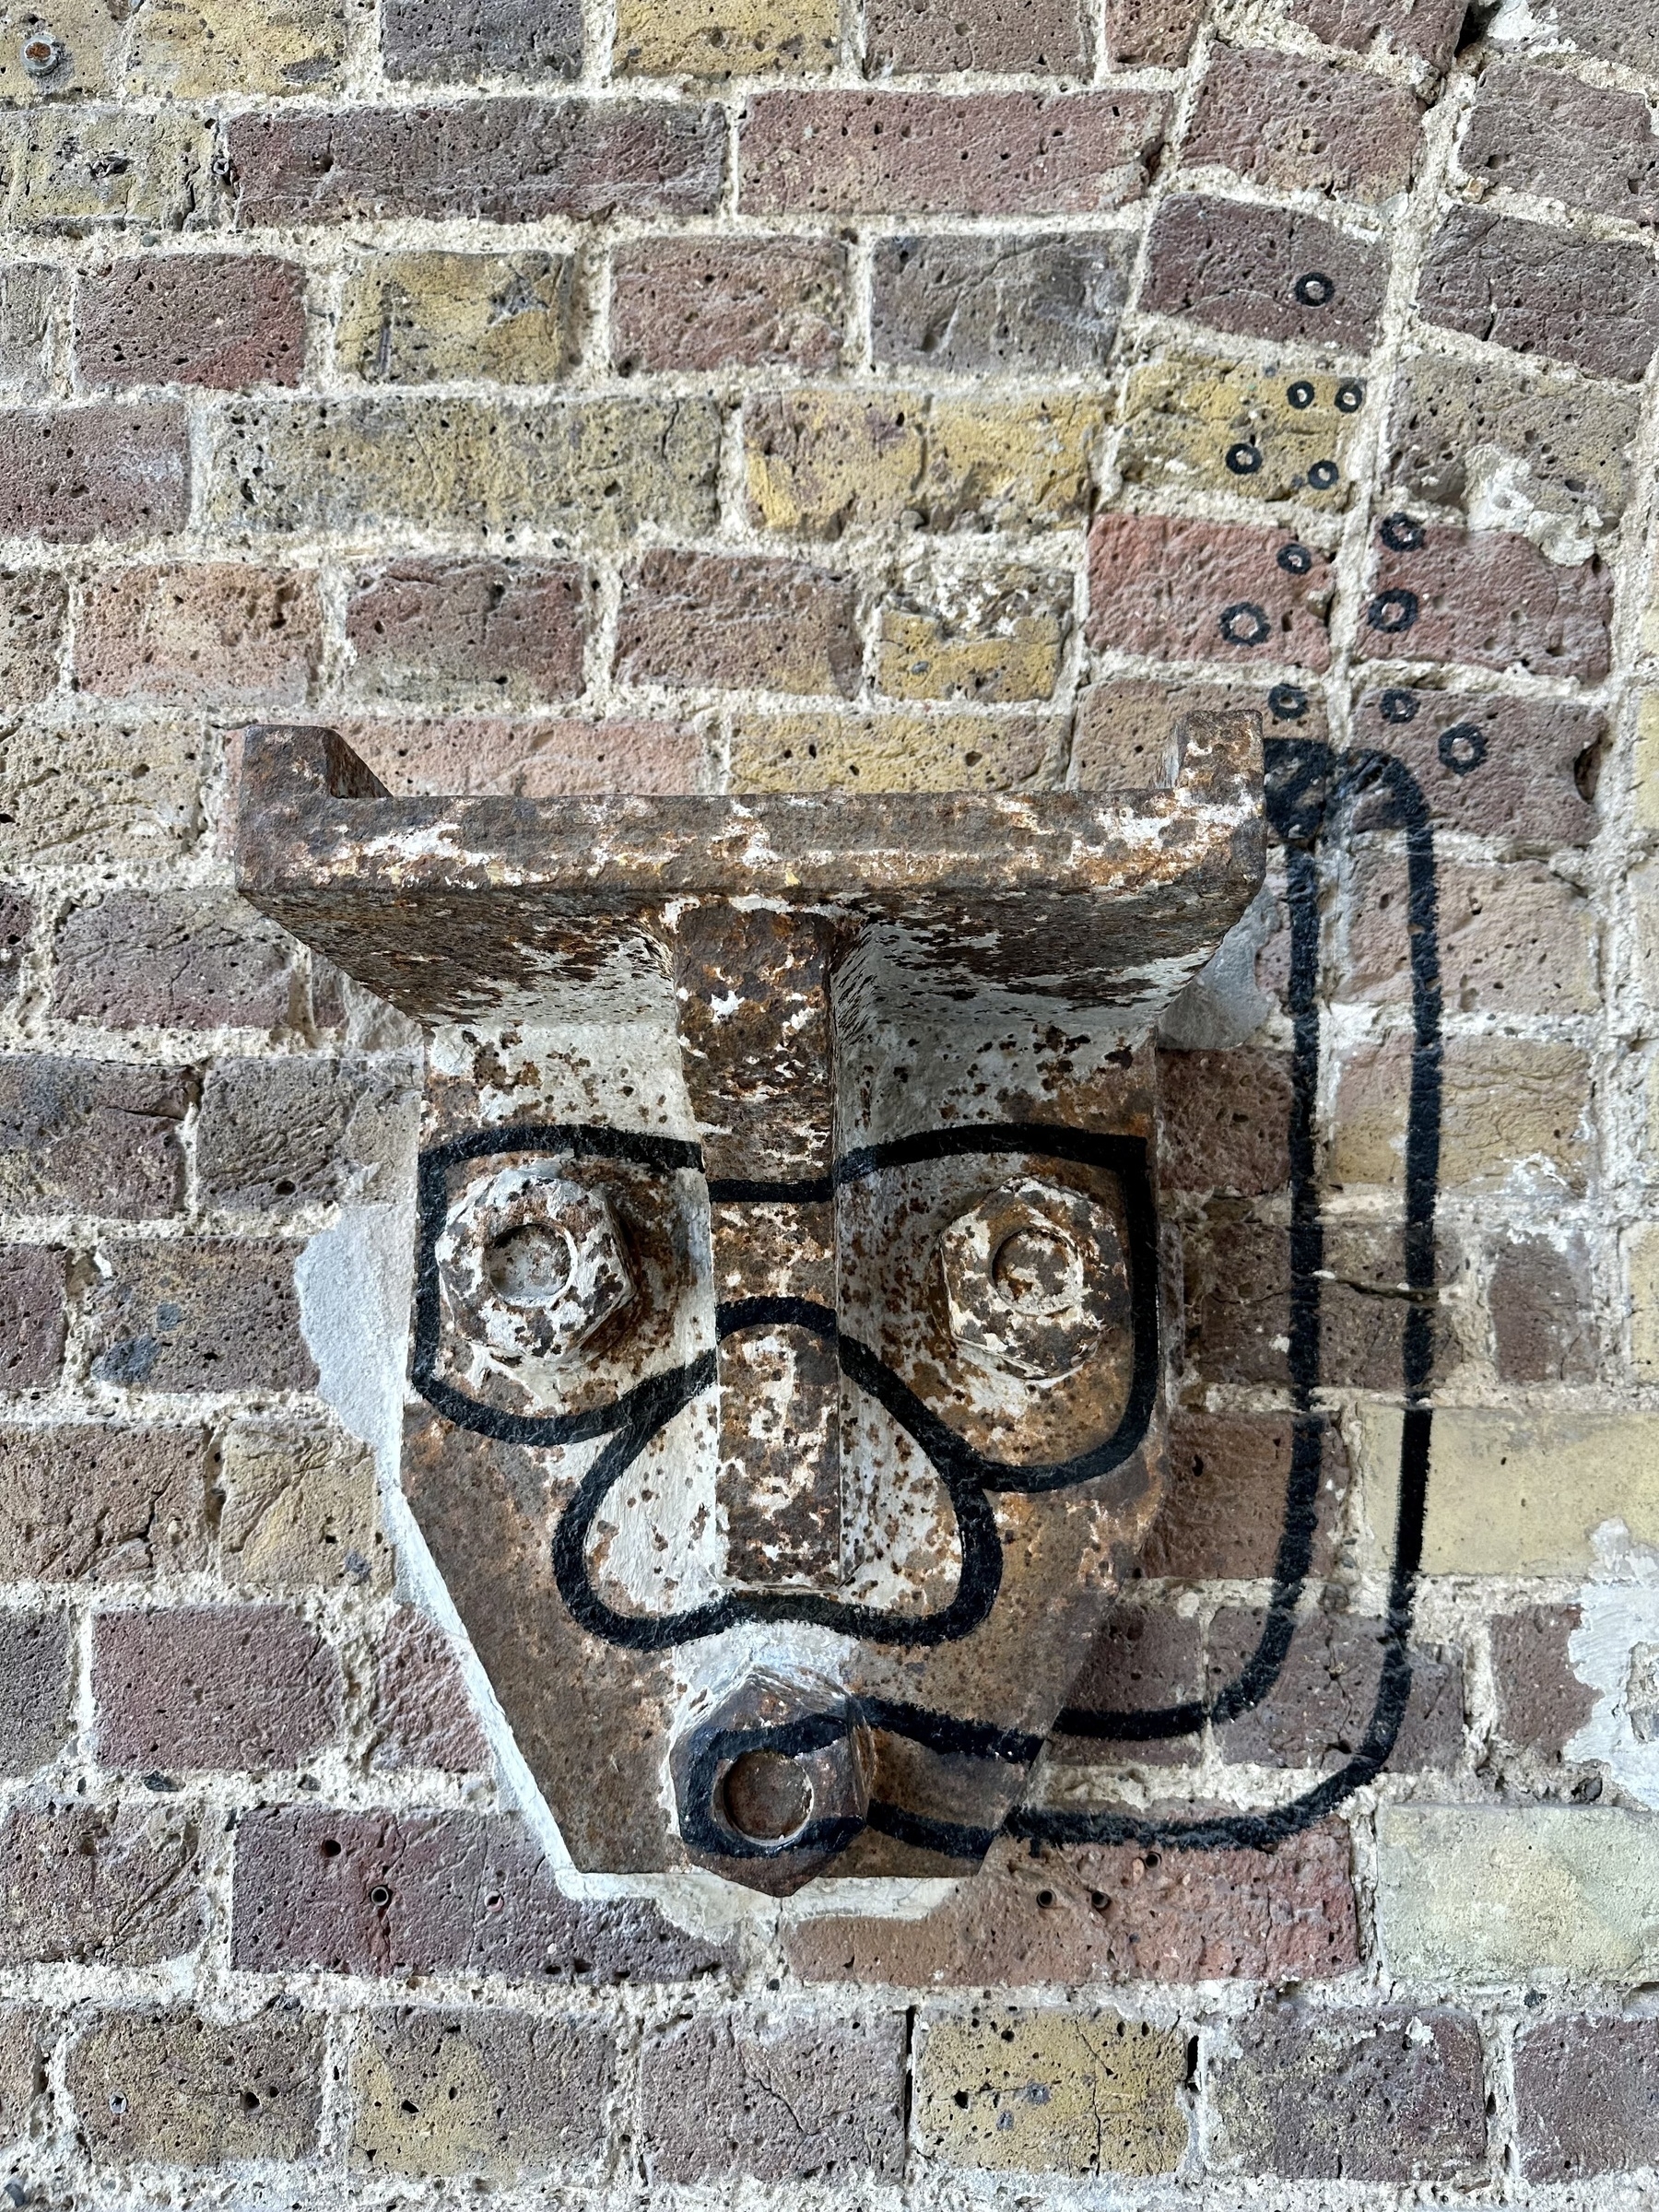 The end of a metal girder sticking out from a brick wall. A snorkel, goggles and bubbles have been drawn on to the girder and wall to make it look like someone snorkelling.